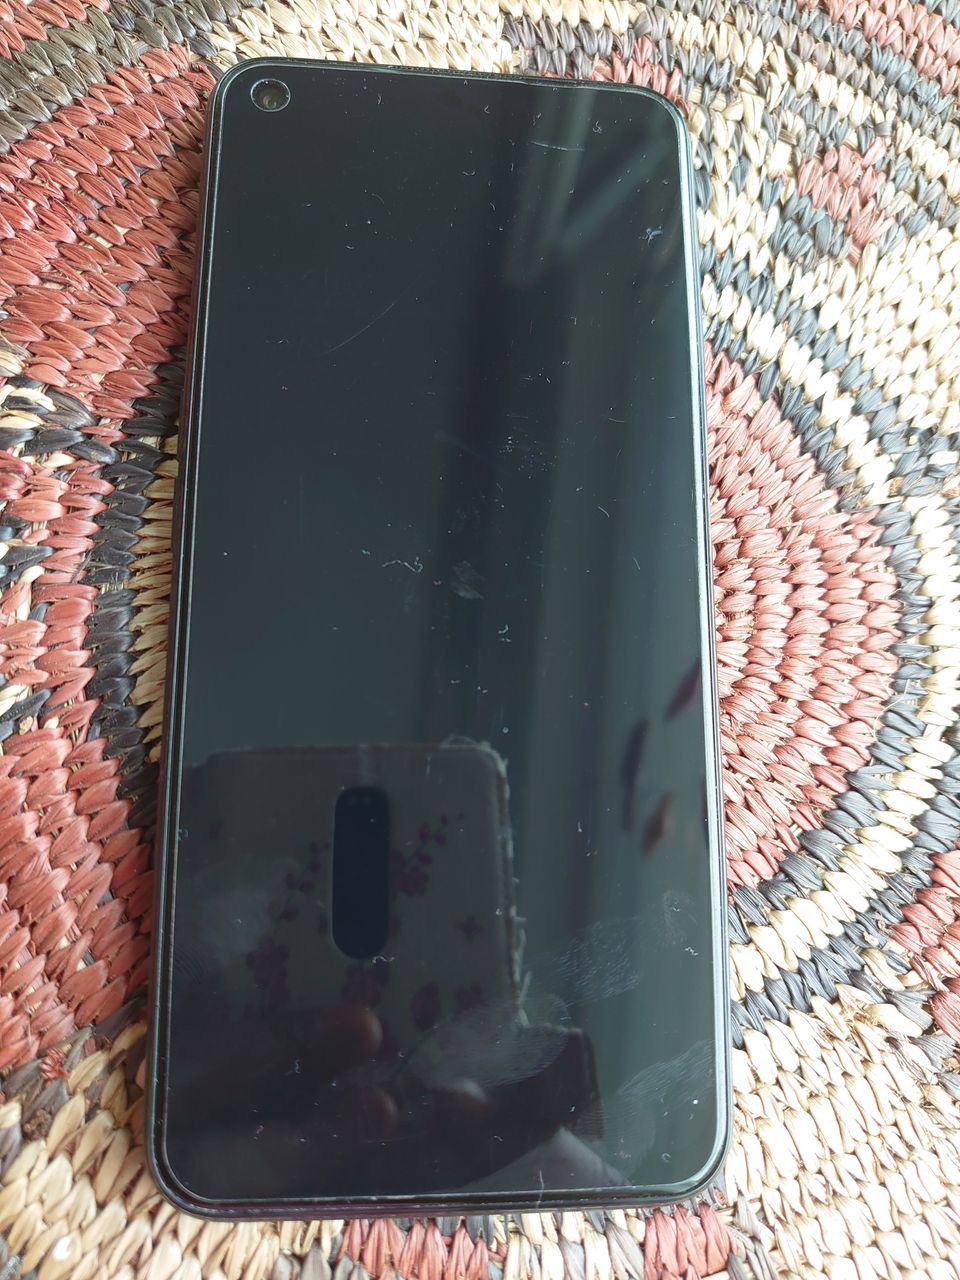 OnePlus for sale 128 gb price 140